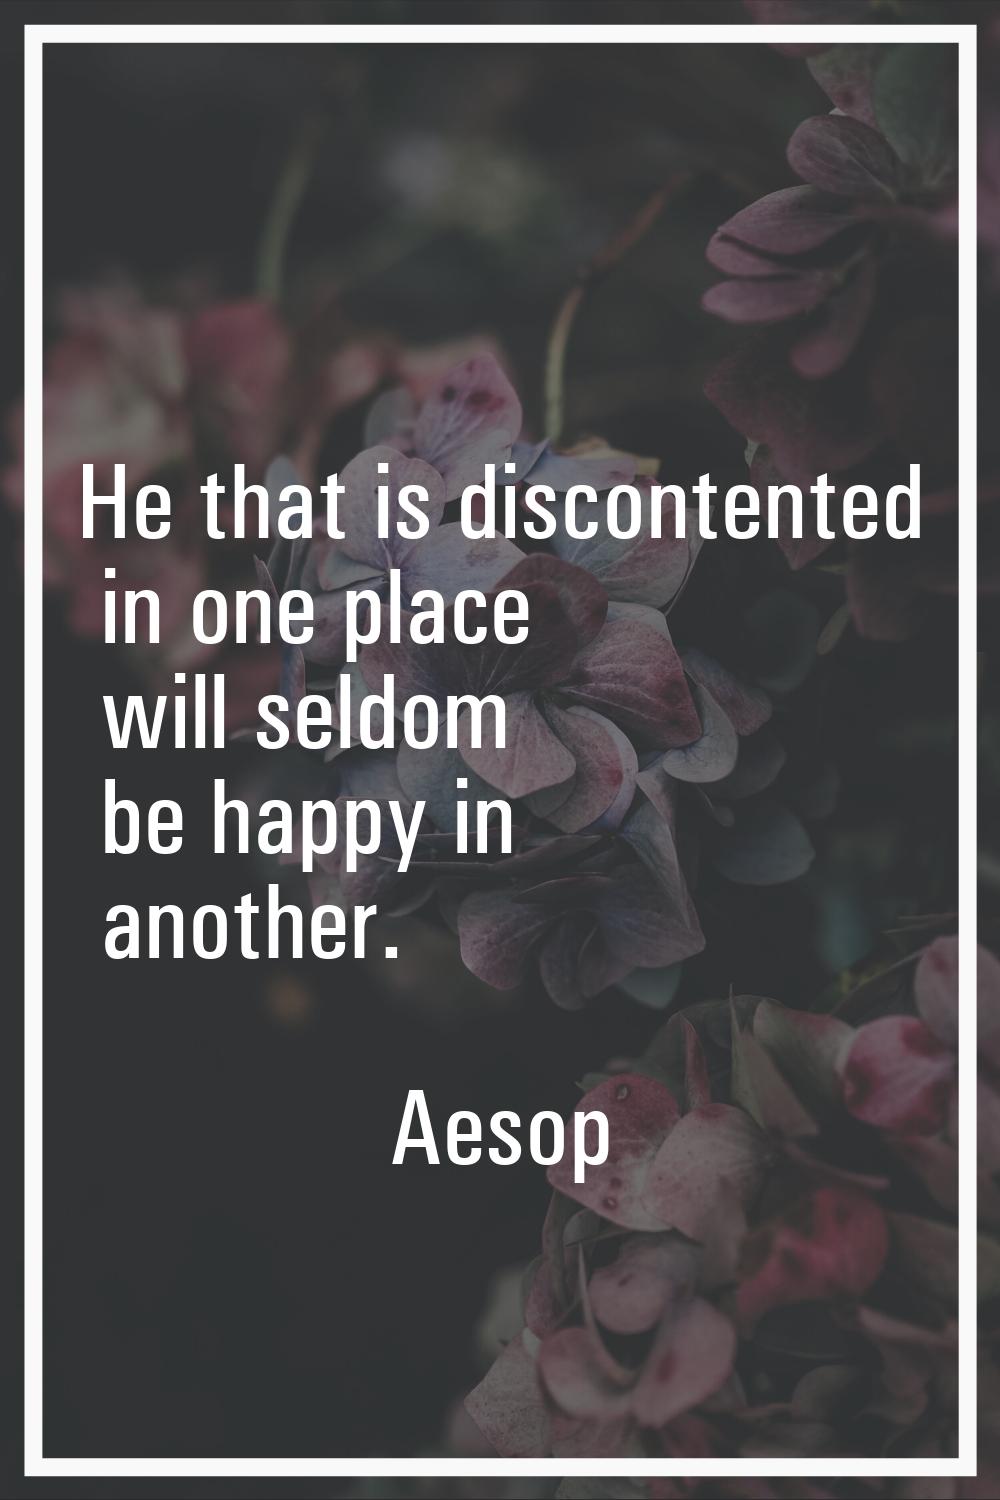 He that is discontented in one place will seldom be happy in another.